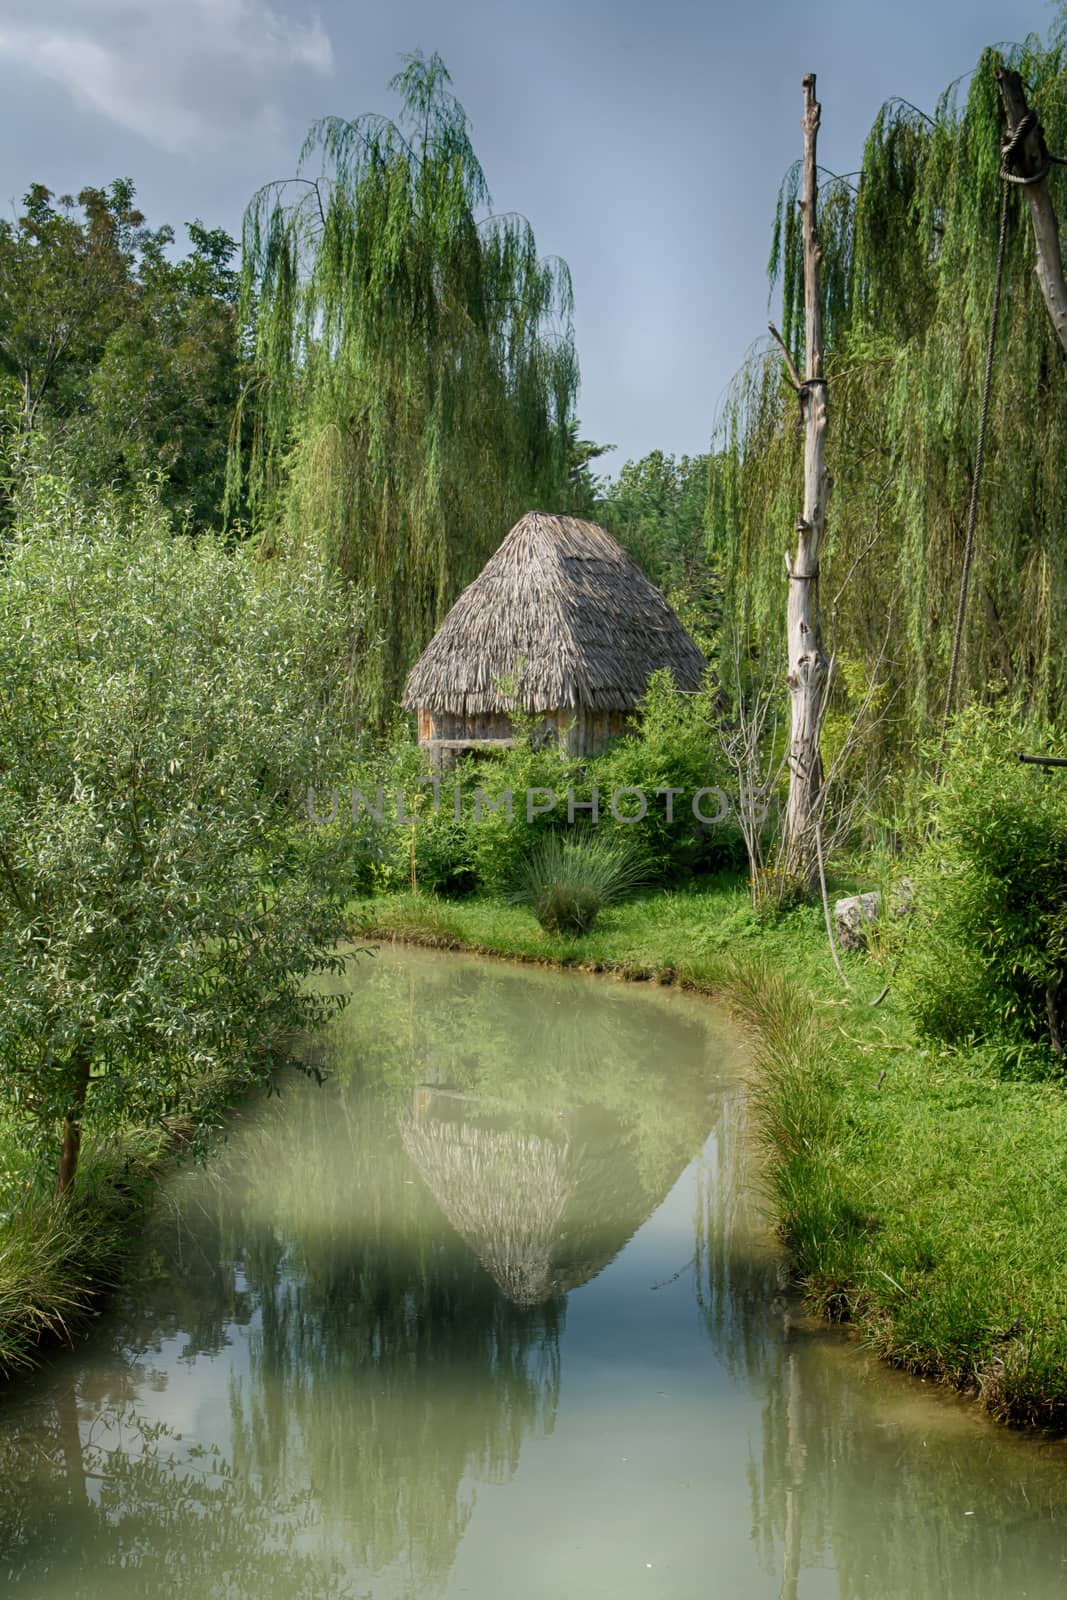 thatched hut on the river bank by Isaac74